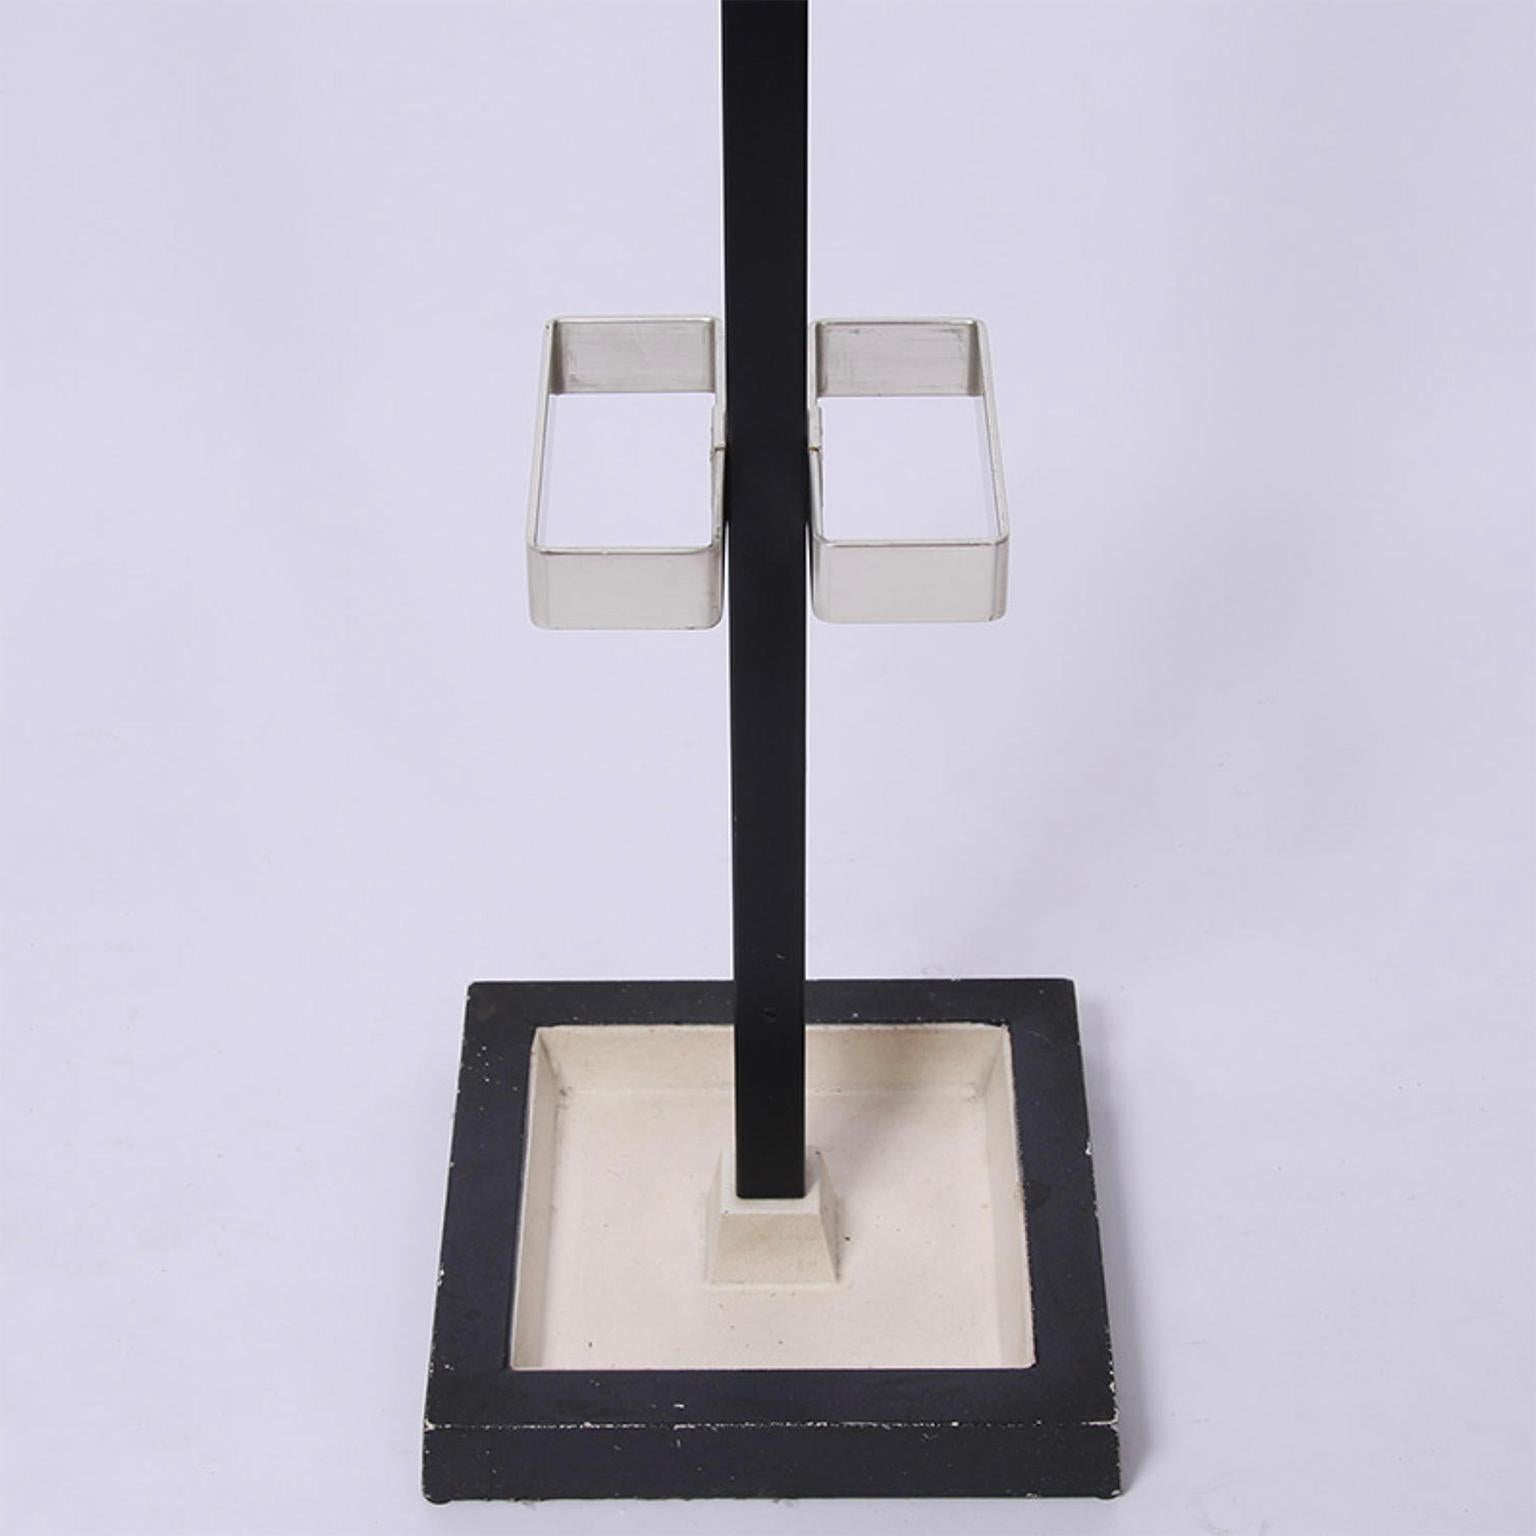 A very solid painted metal coat and umbrella stand with a black and white base and metal hooks.